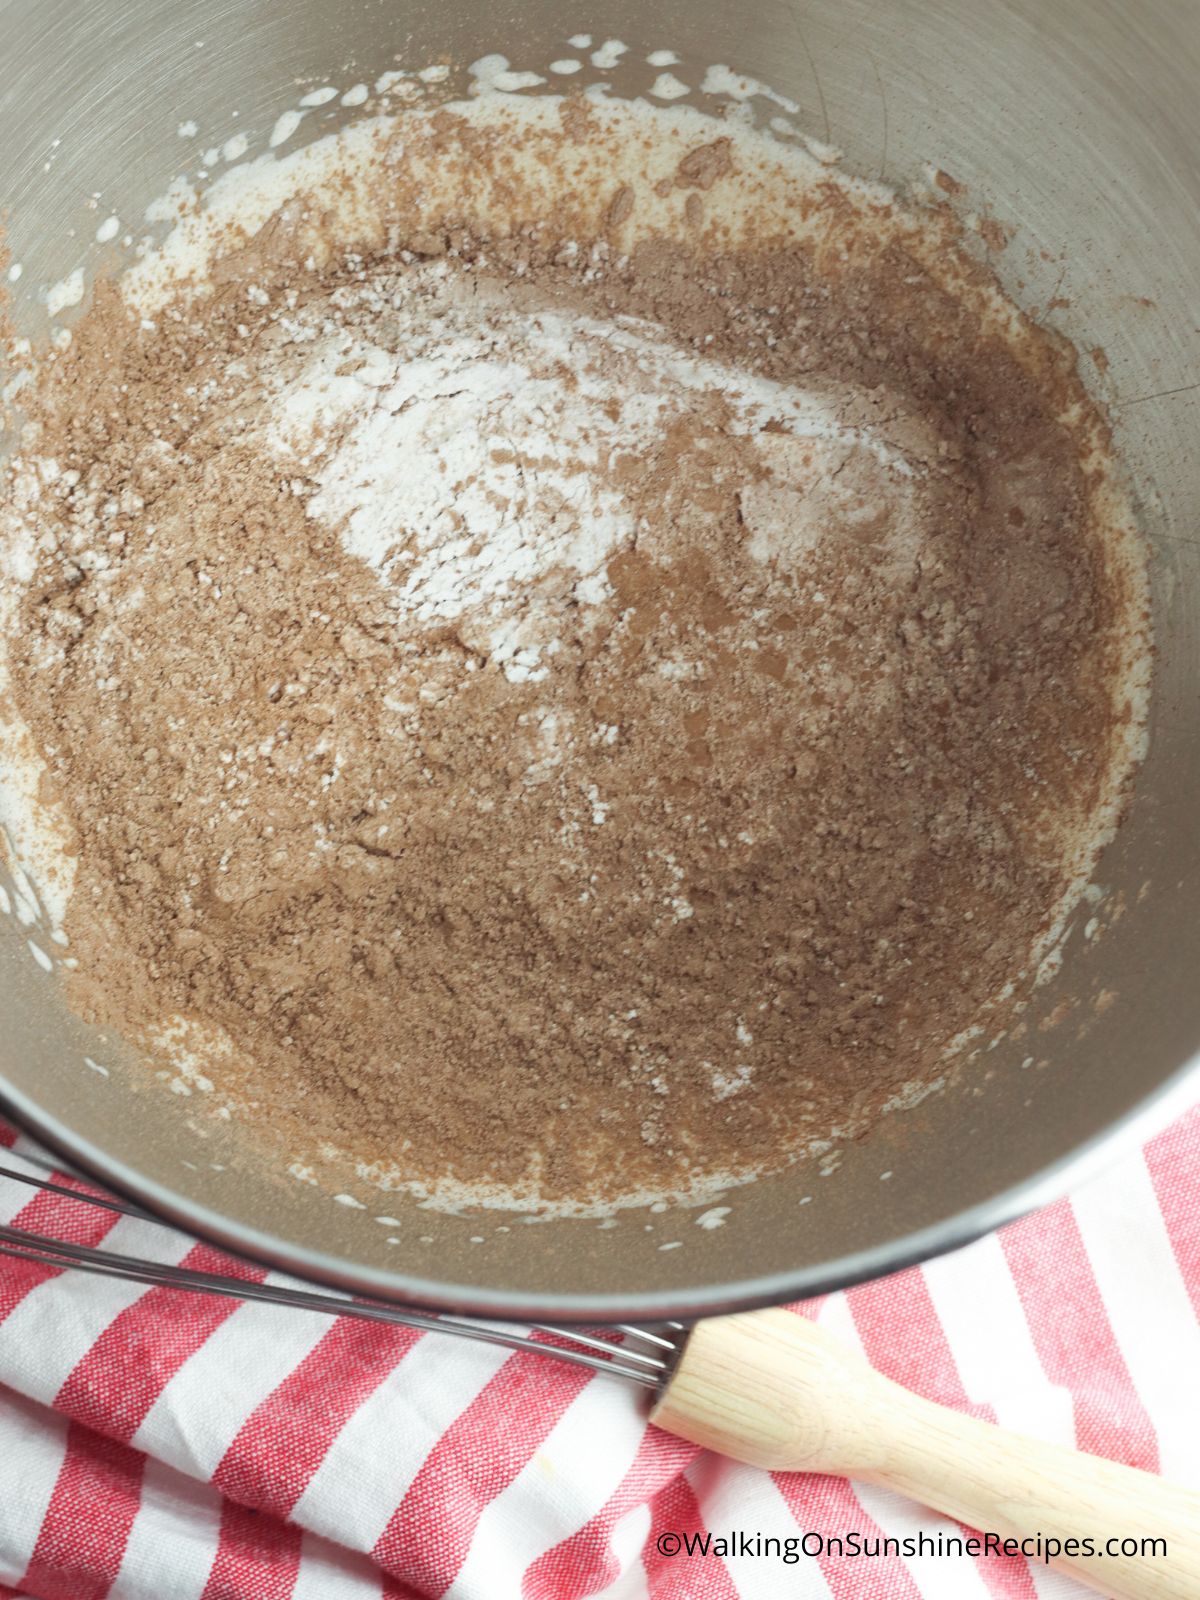 cocoa powder and whipping cream in bowl.